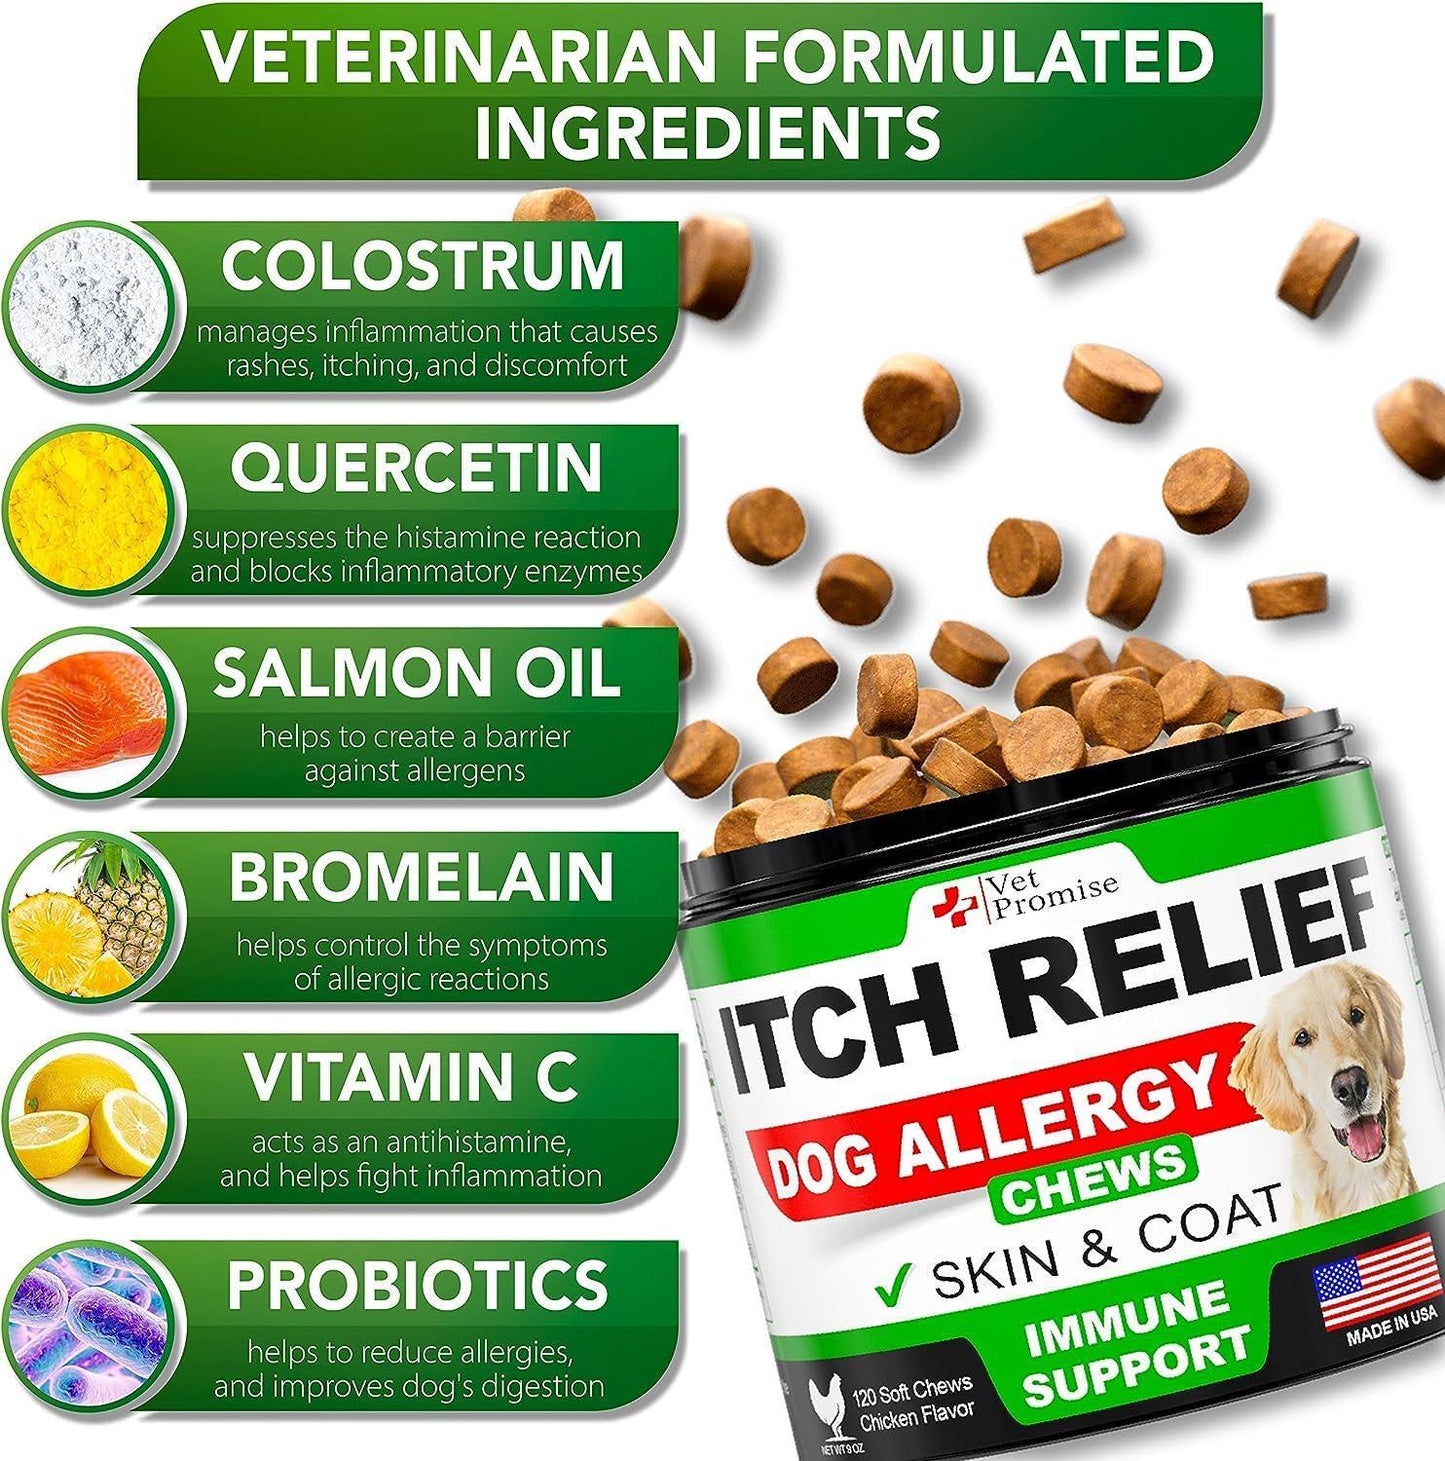 (2 Pack) Dog Allergy Chews   Itch Relief for Dogs   Dog Allergy Relief   Anti Itch for Dogs   Dog Itchy Skin   Dog Allergy Support   Immune Health Supplement   Made in USA   240 Treats